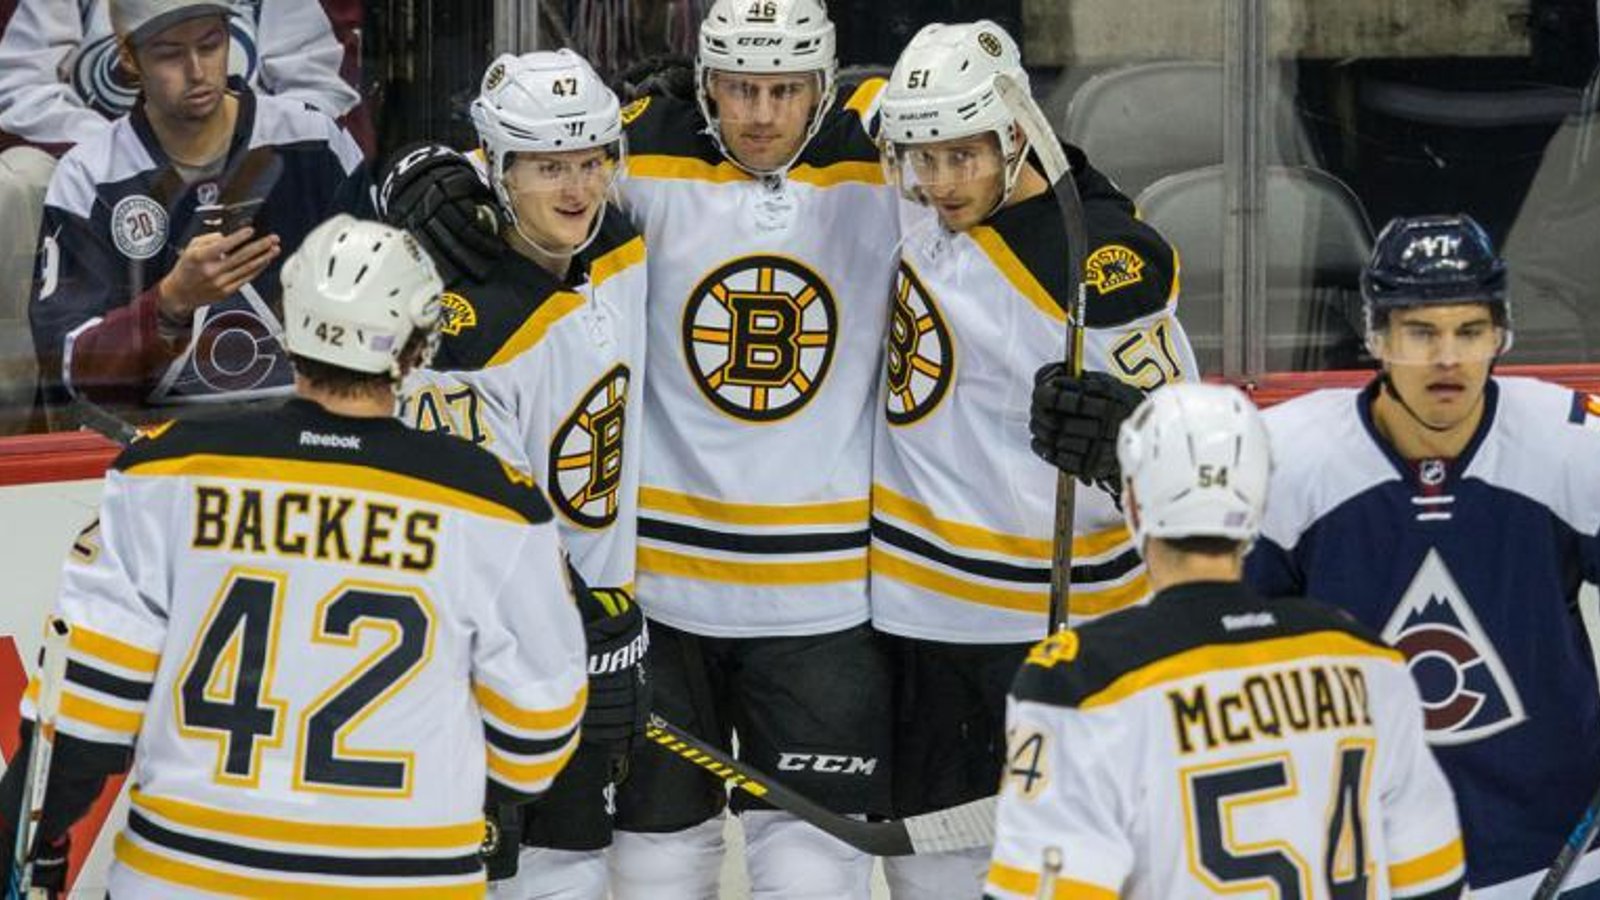 Report: Bruins look to young prospects to replace Bergeron